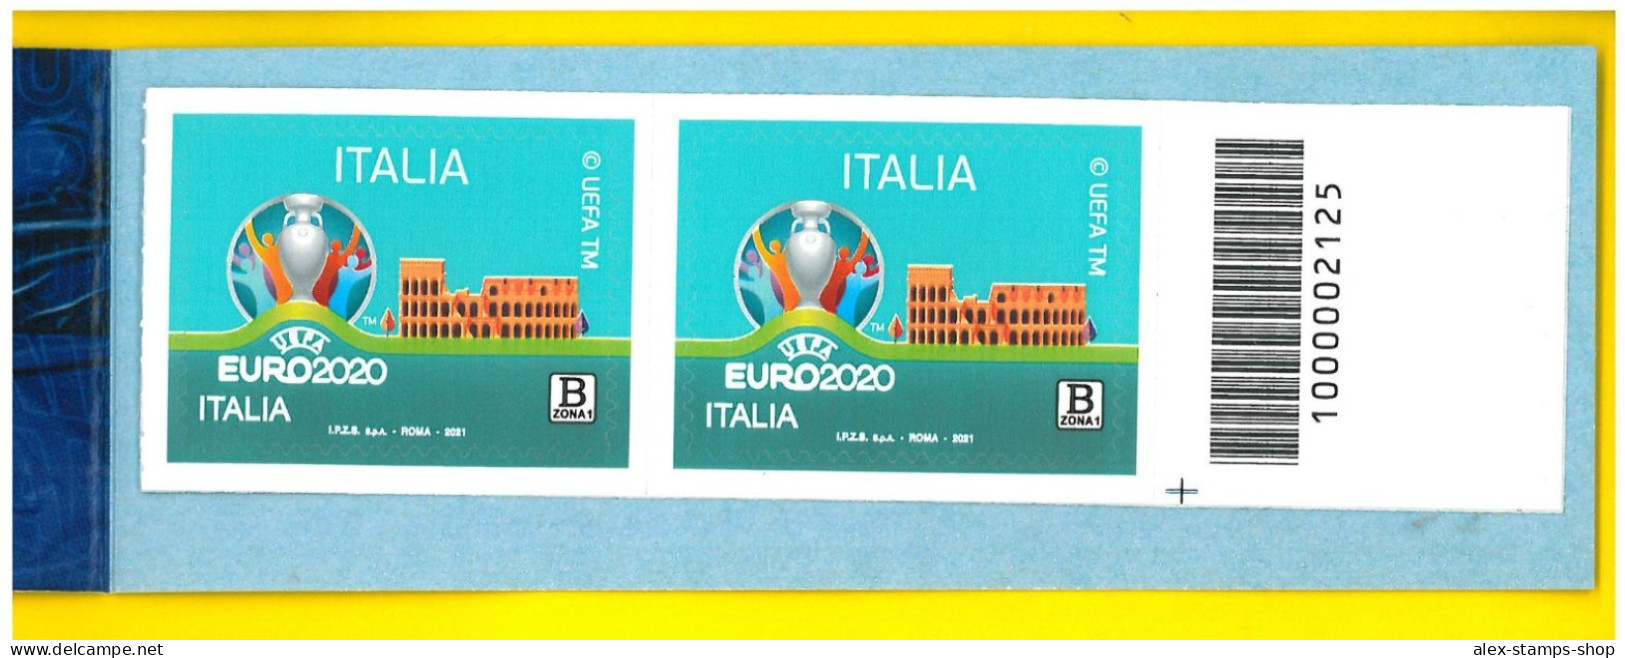 ITALIA 2021 NEW BOOKLET EUROPEAN 2020 - BARCODE NUMBER 020 - Booklets